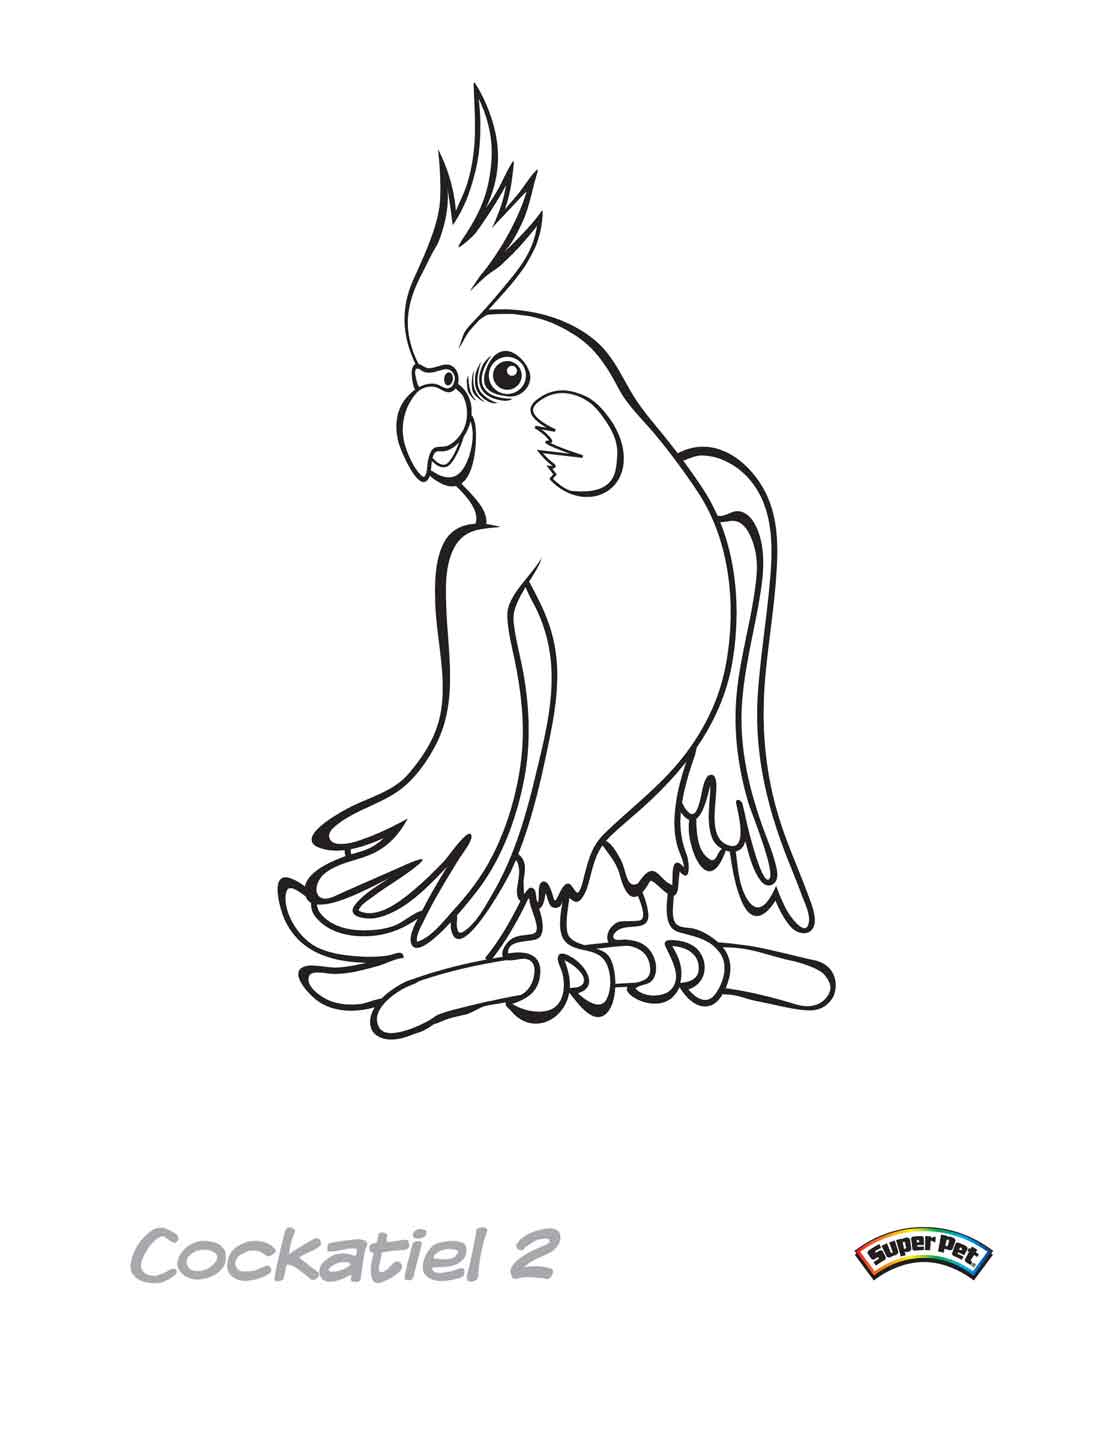 Free Cockatiel Coloring Pages Black and White printable